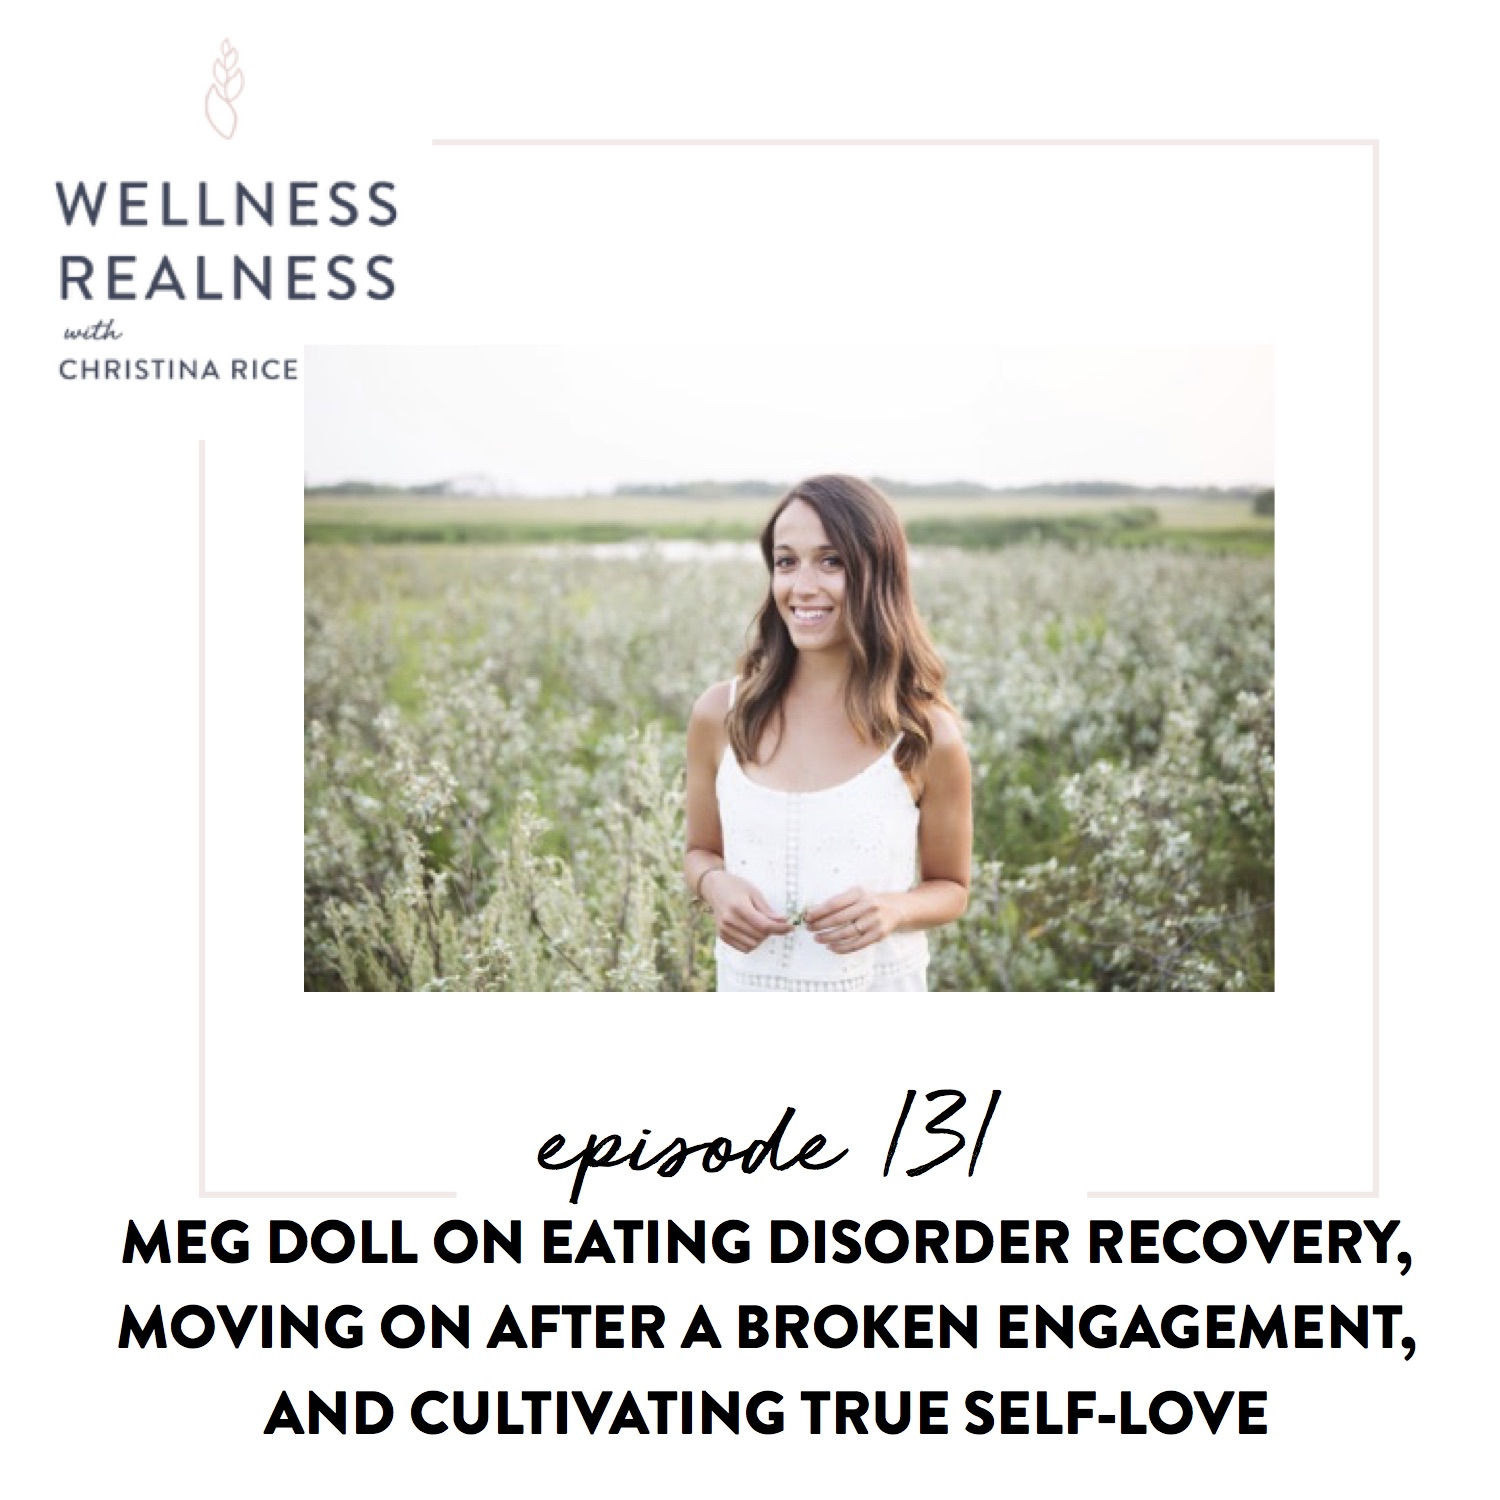 131: Meg Doll on Eating Disorder Recovery, Moving on After a Broken Engagement, and Cultivating True Self-Love